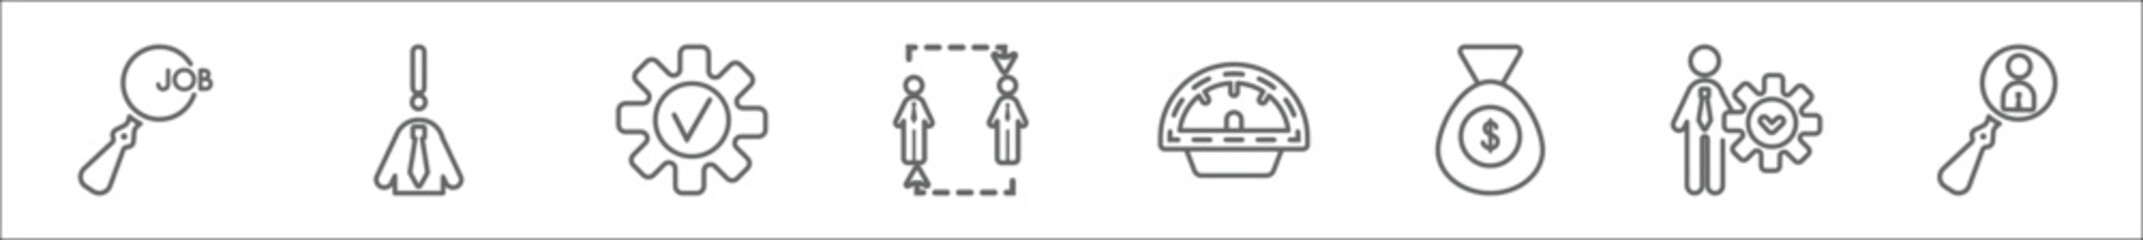 outline set of human resources line icons. linear vector icons such as job search, problems, approval, change personal, balanced scorecard, salary, emotional intelligence, candidates